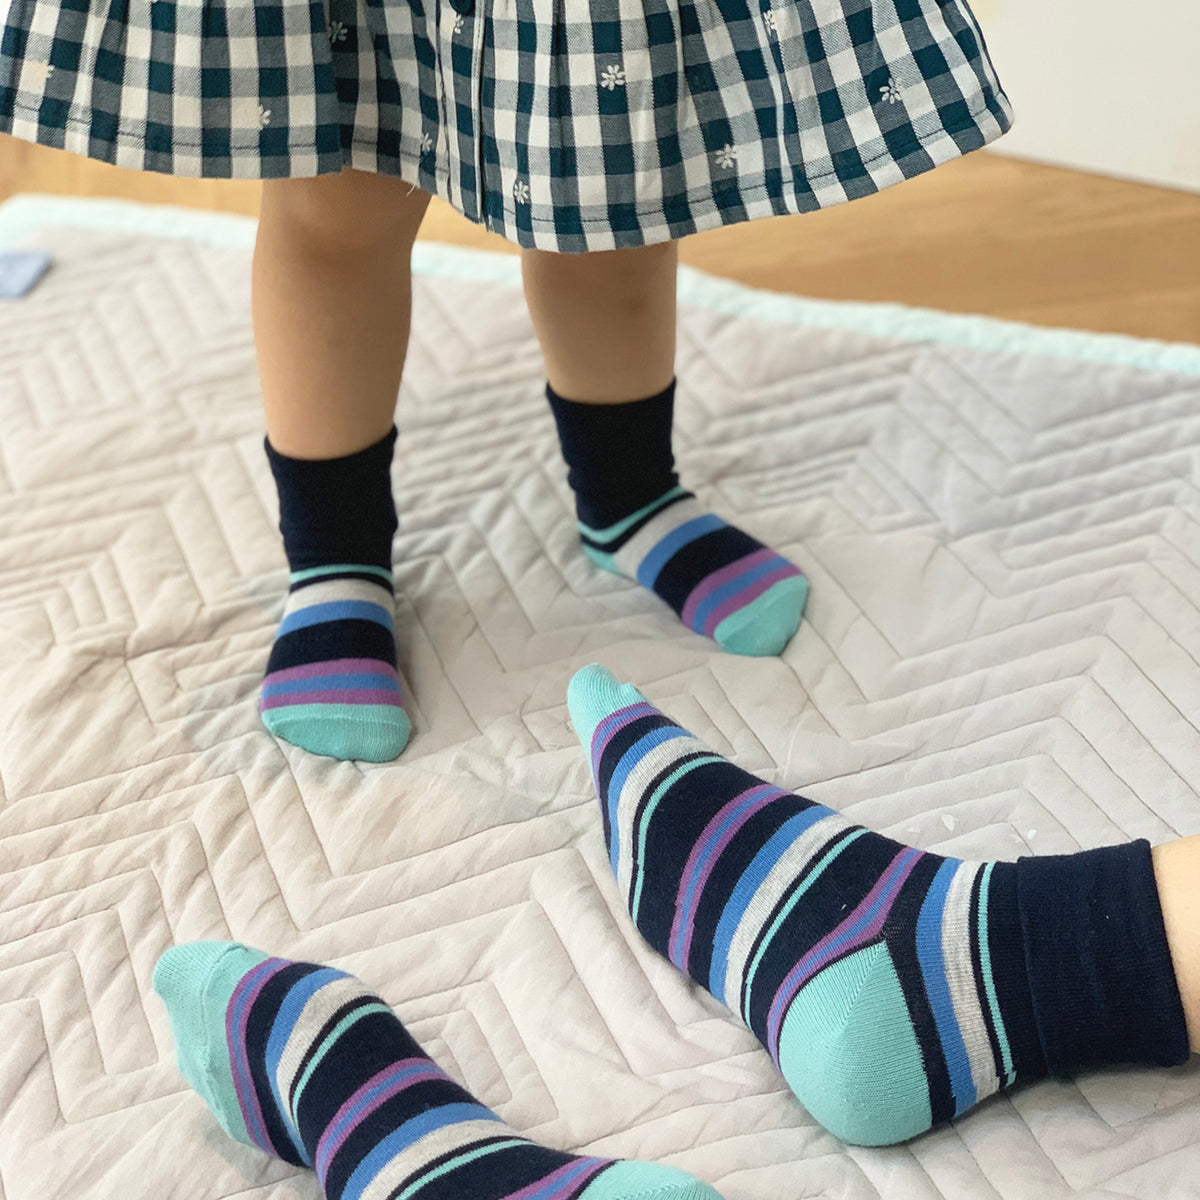 Mini Me Matching Adults and Child Family Socks Gift Set in Navy Stripe - The Perfect Birthday or Father’s Day Gift